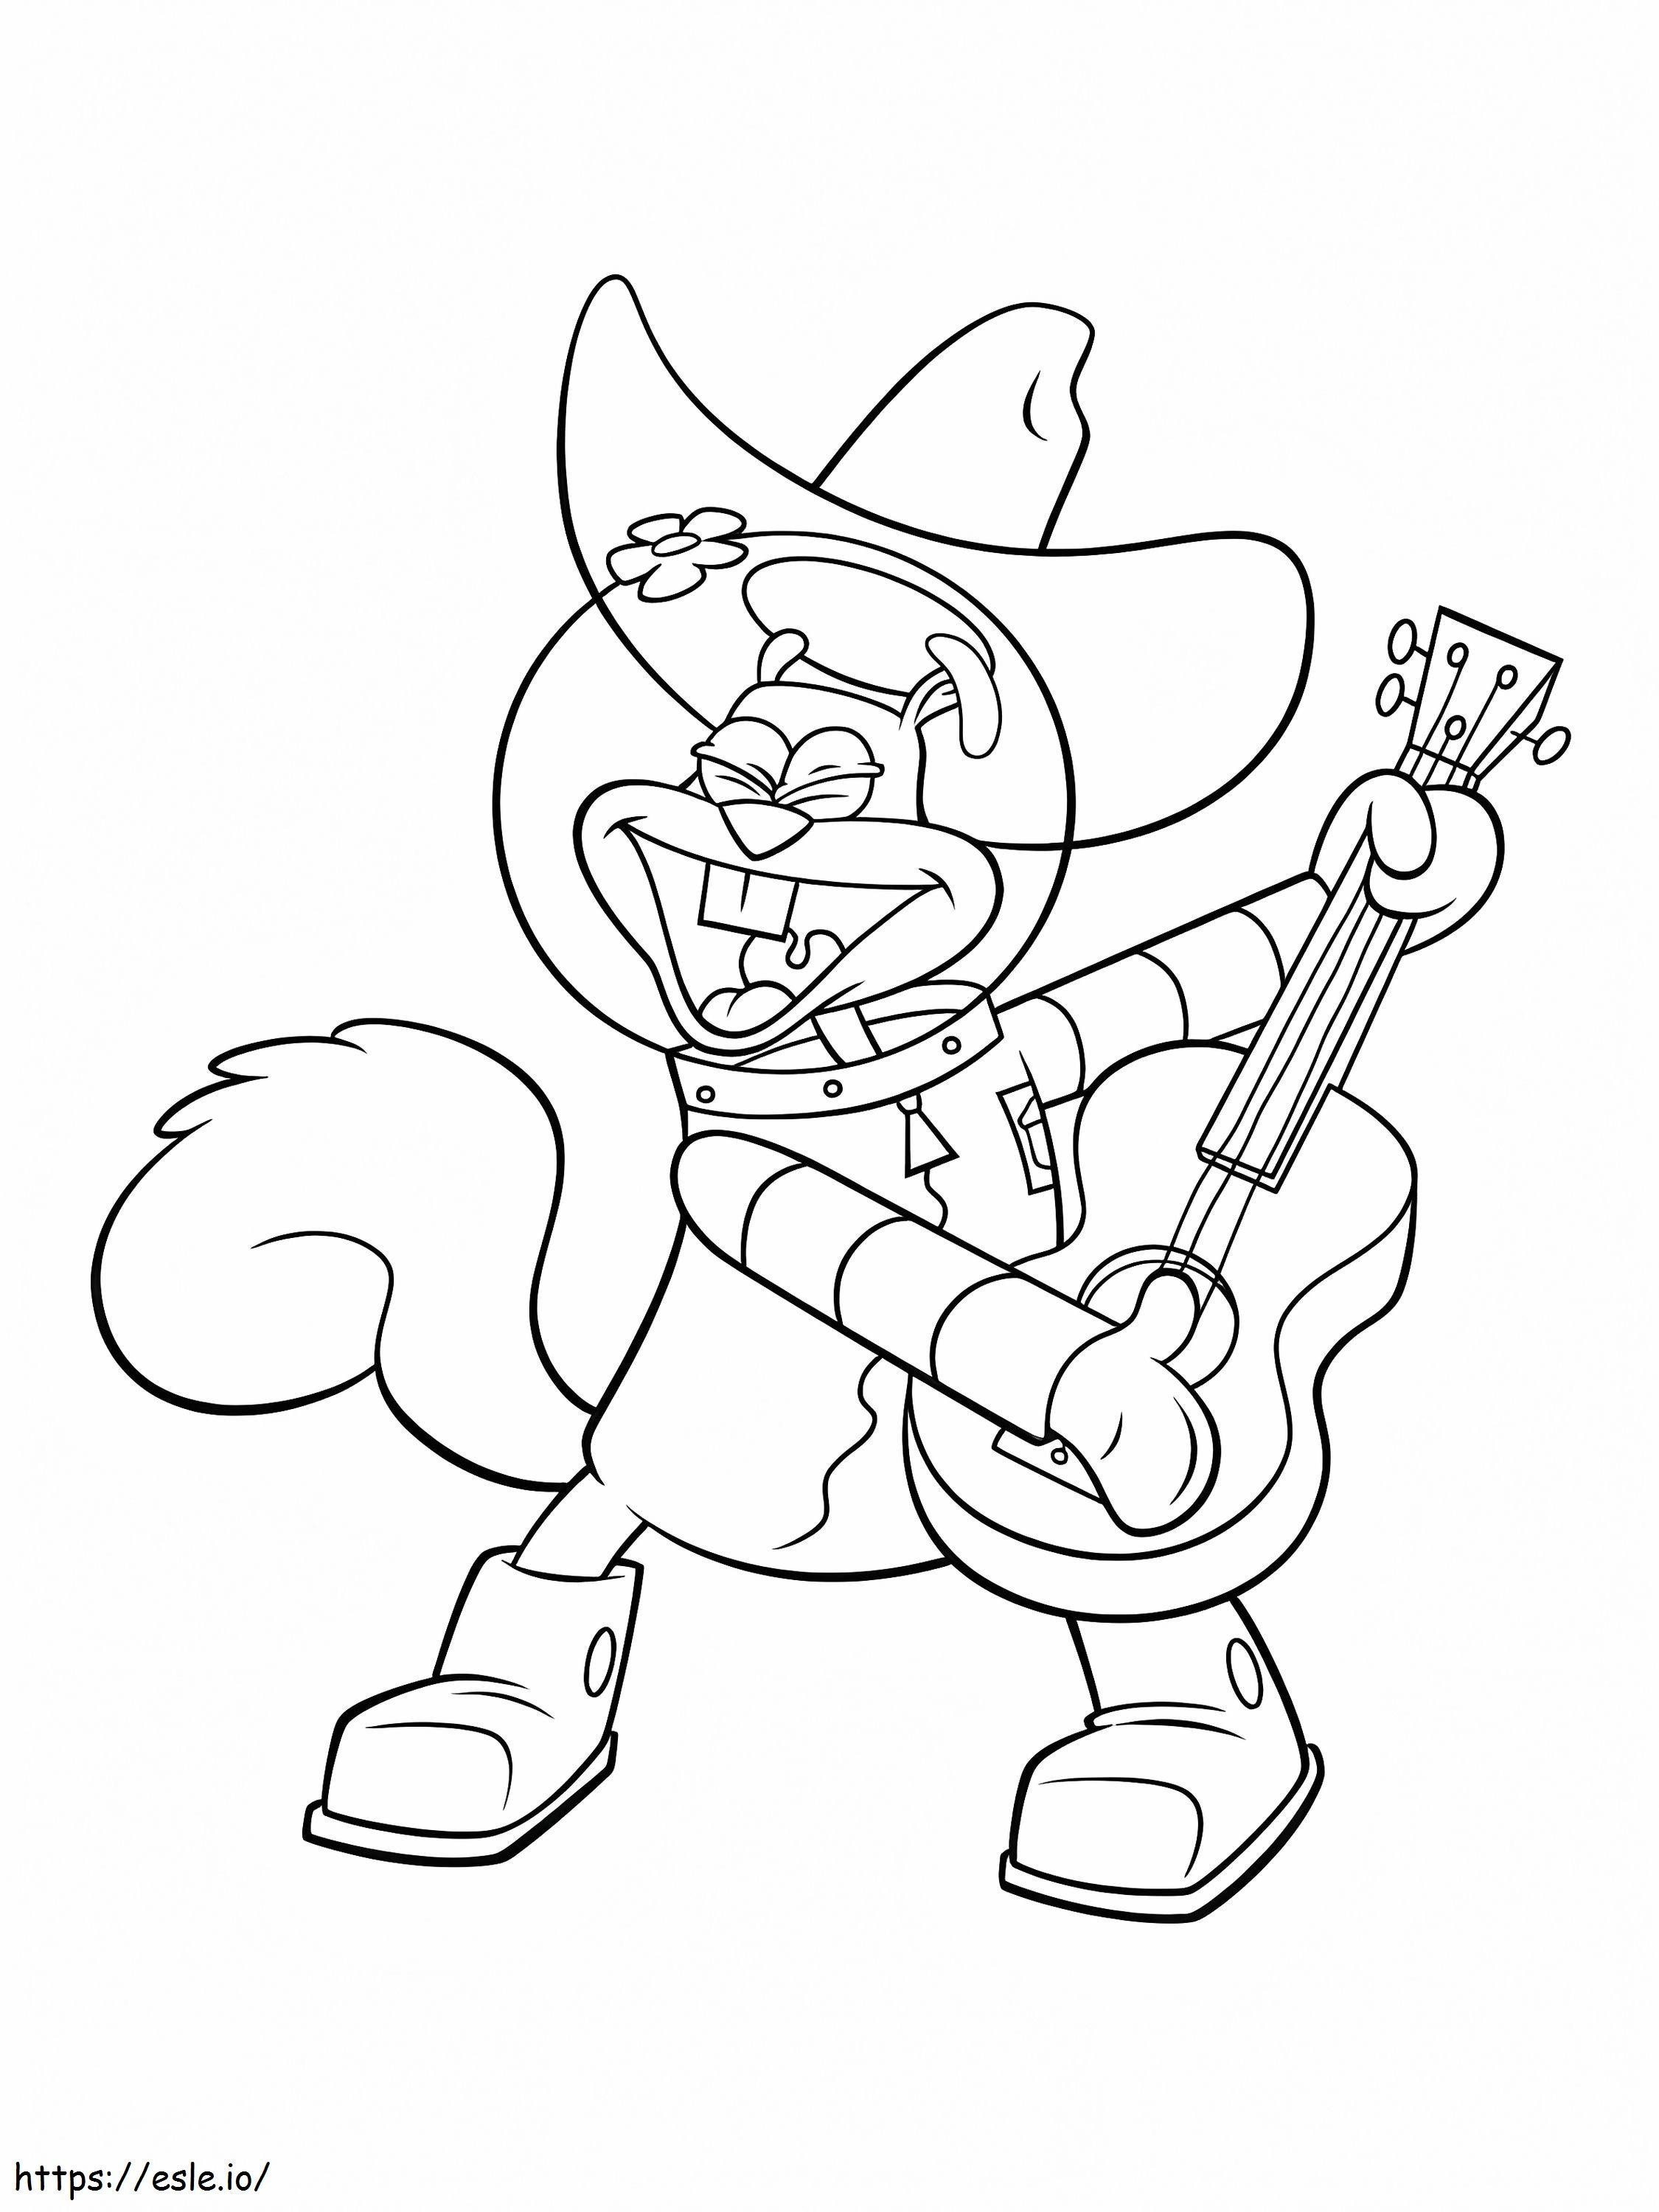 Sandy Cheeks Playing Guitar coloring page